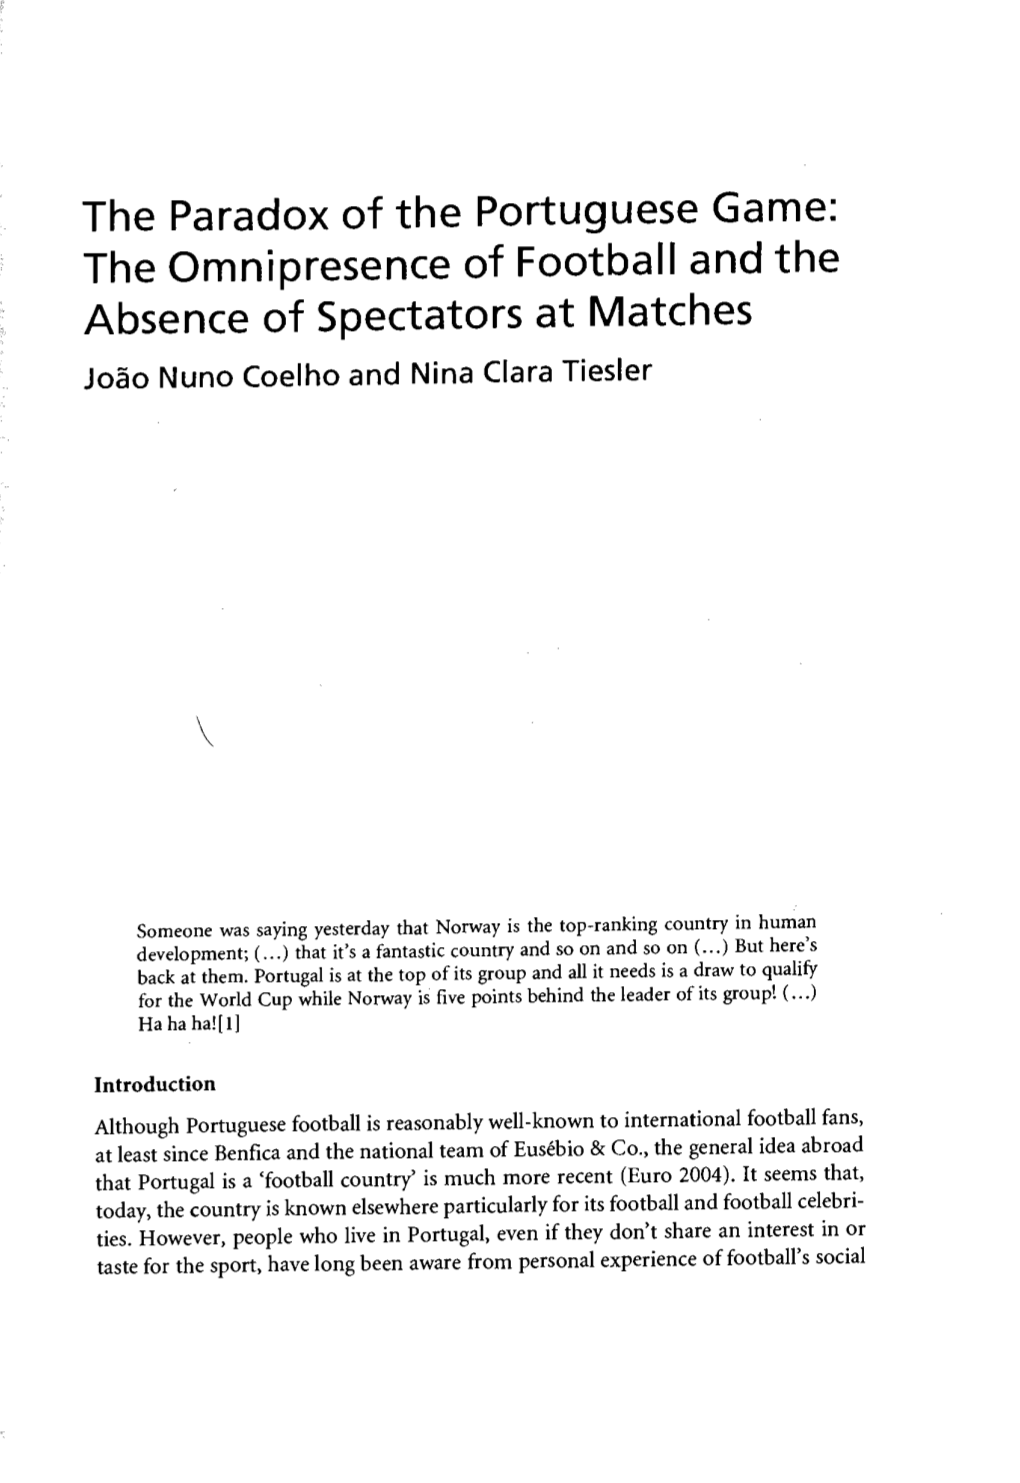 The Omnipresence of Football and the Absence Of